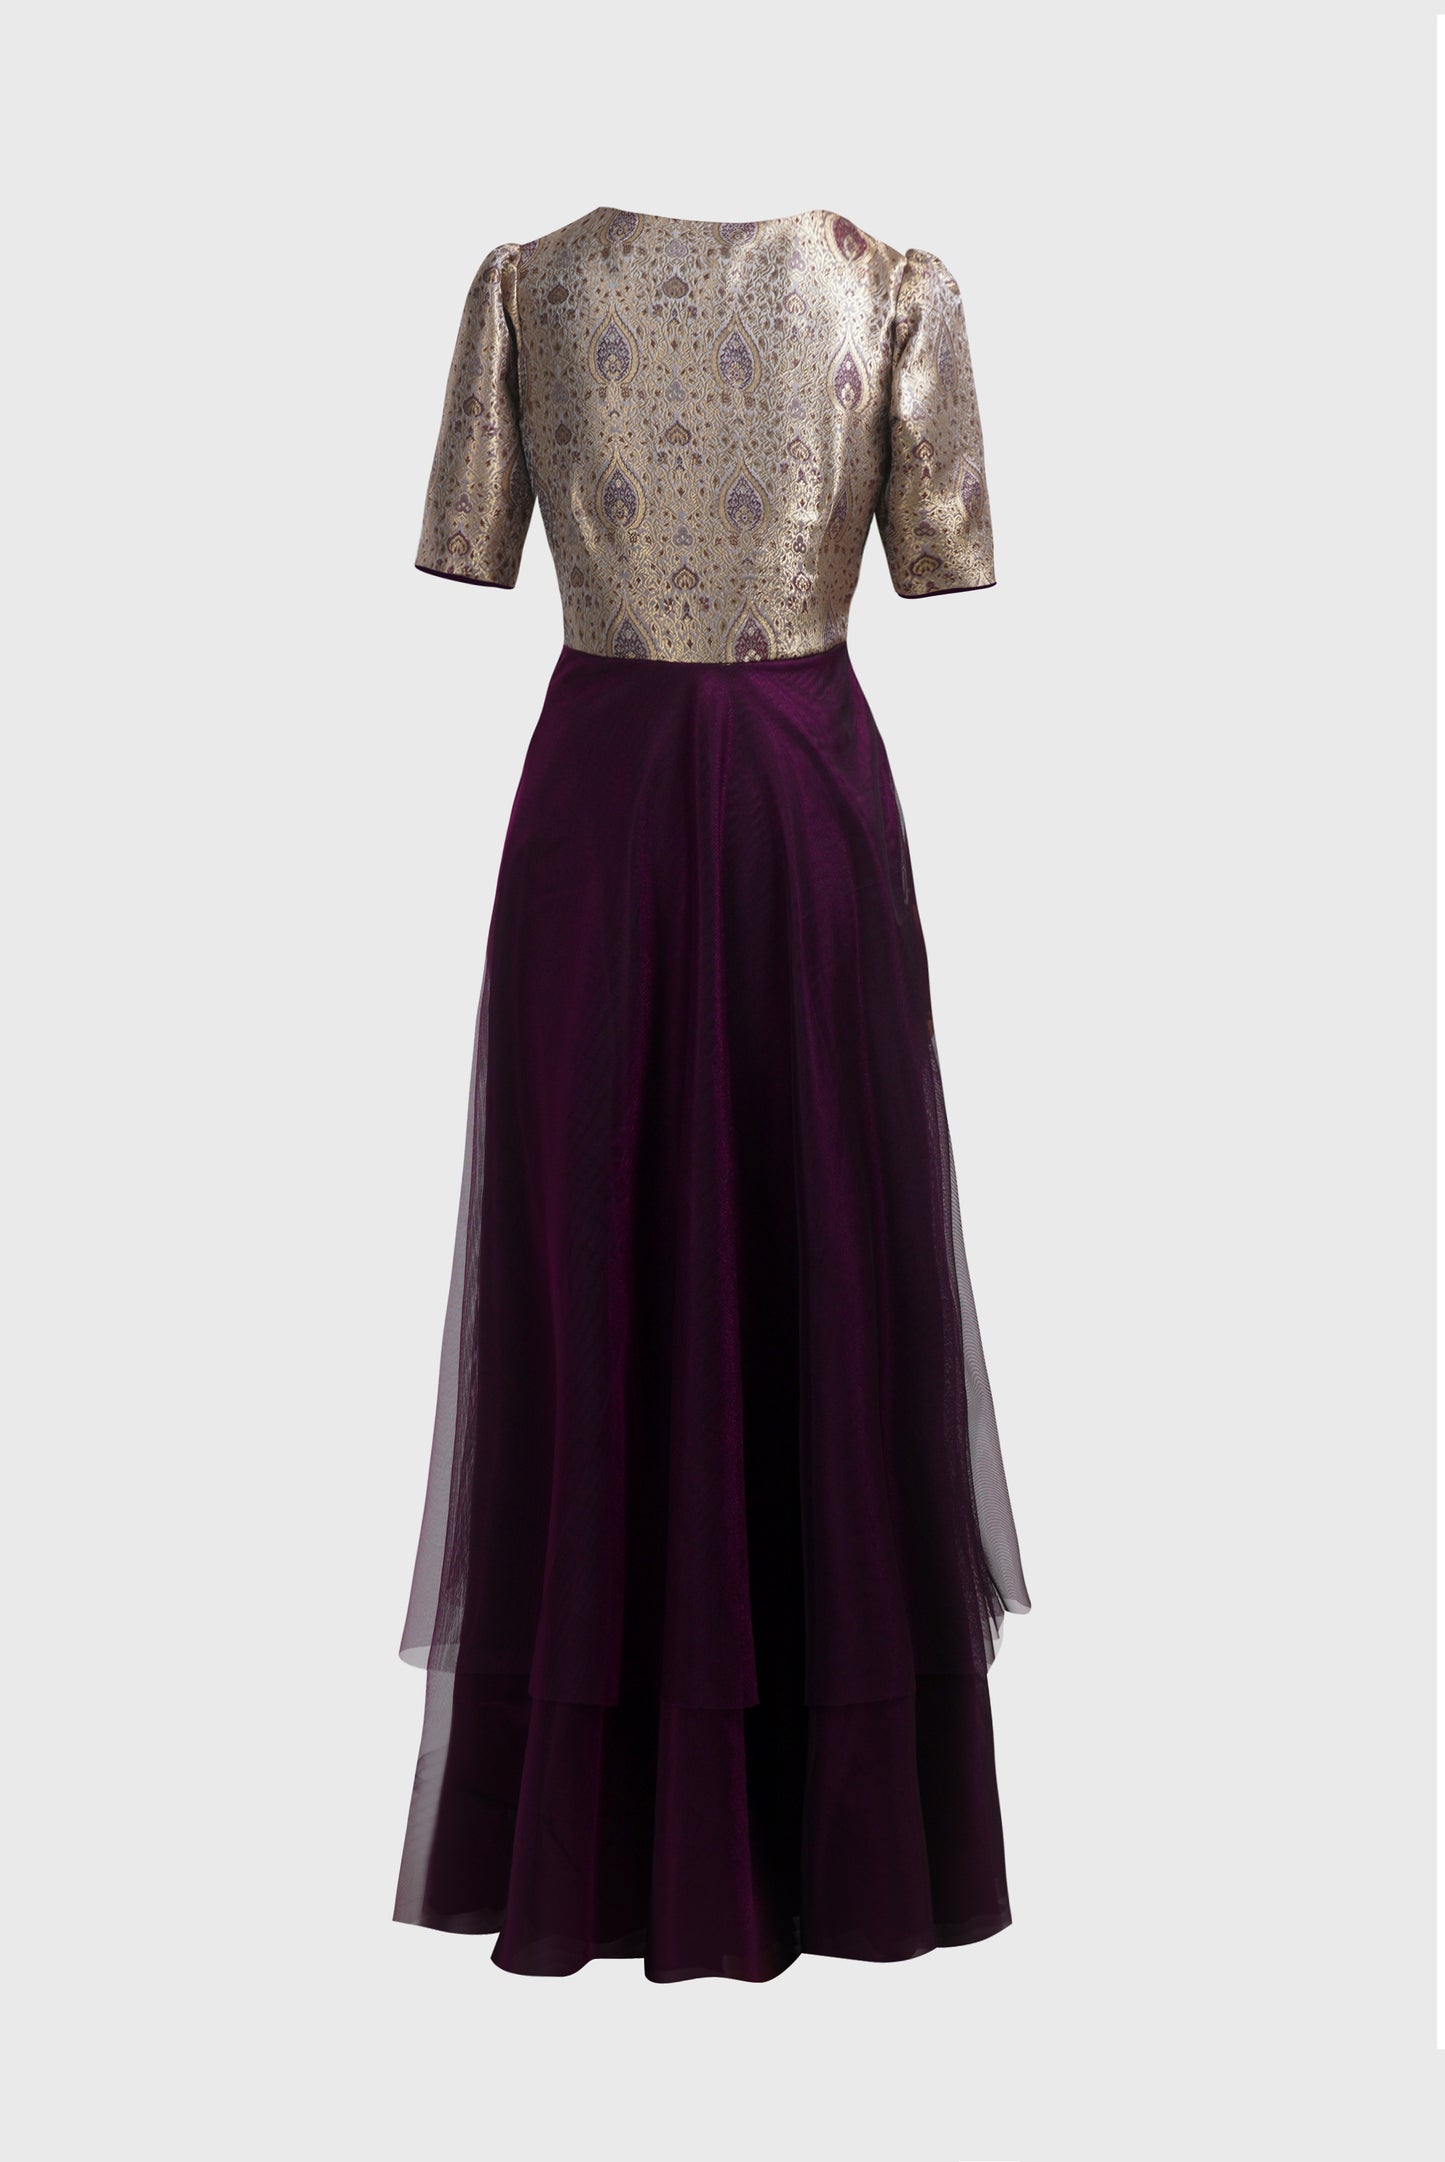 ZIA 247 Violet and Gold Brocade Netted Gown